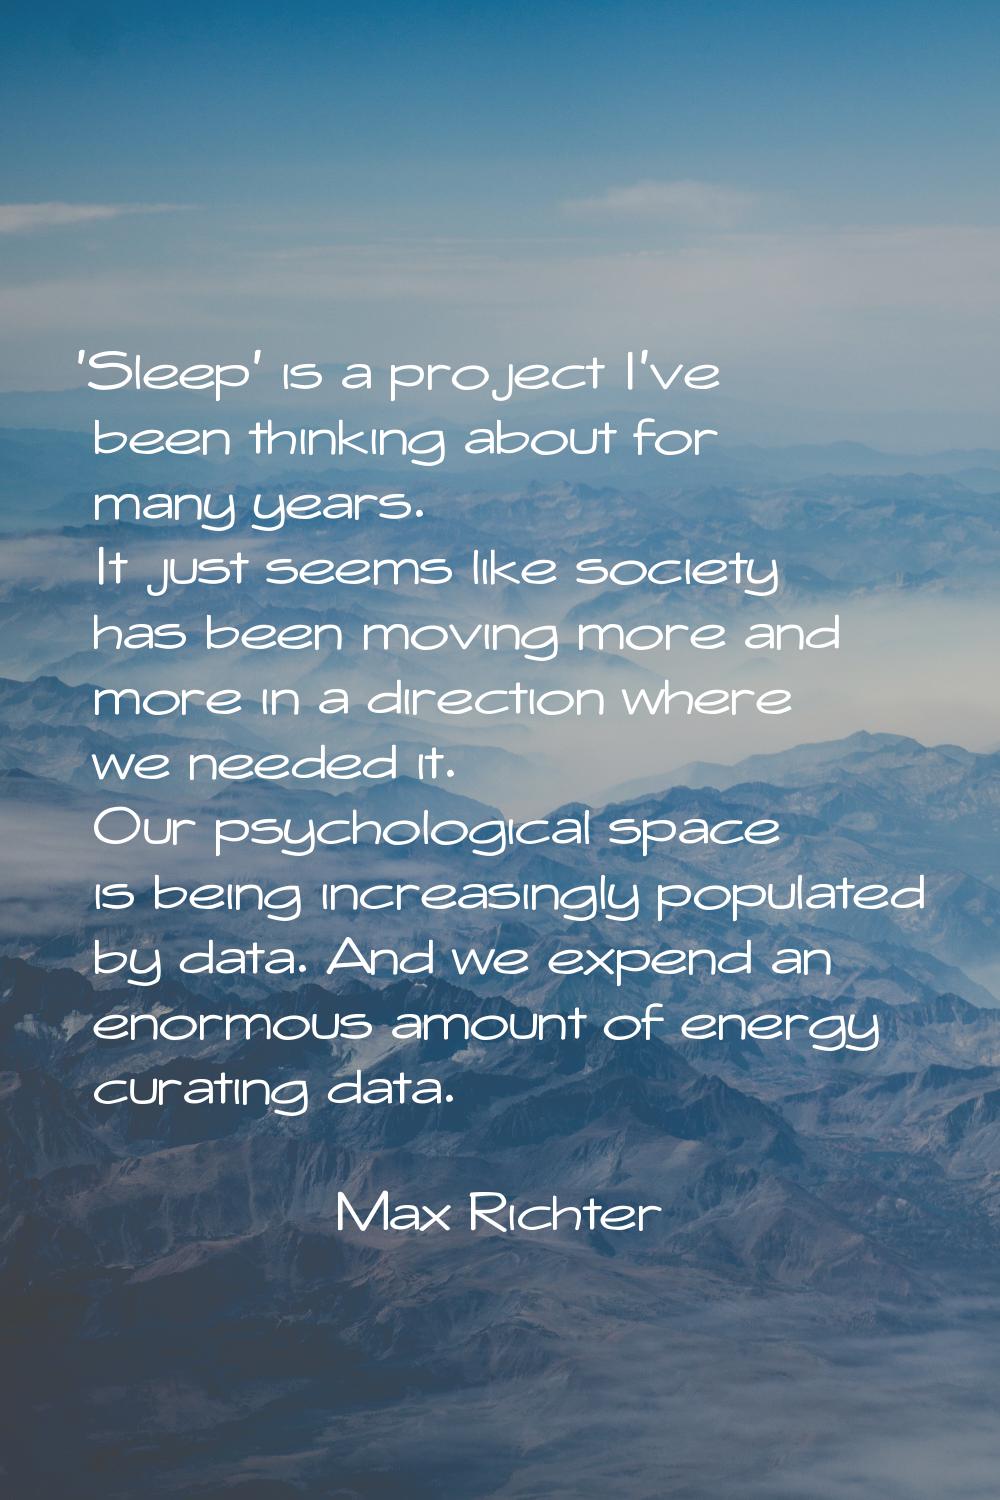 'Sleep' is a project I've been thinking about for many years. It just seems like society has been m